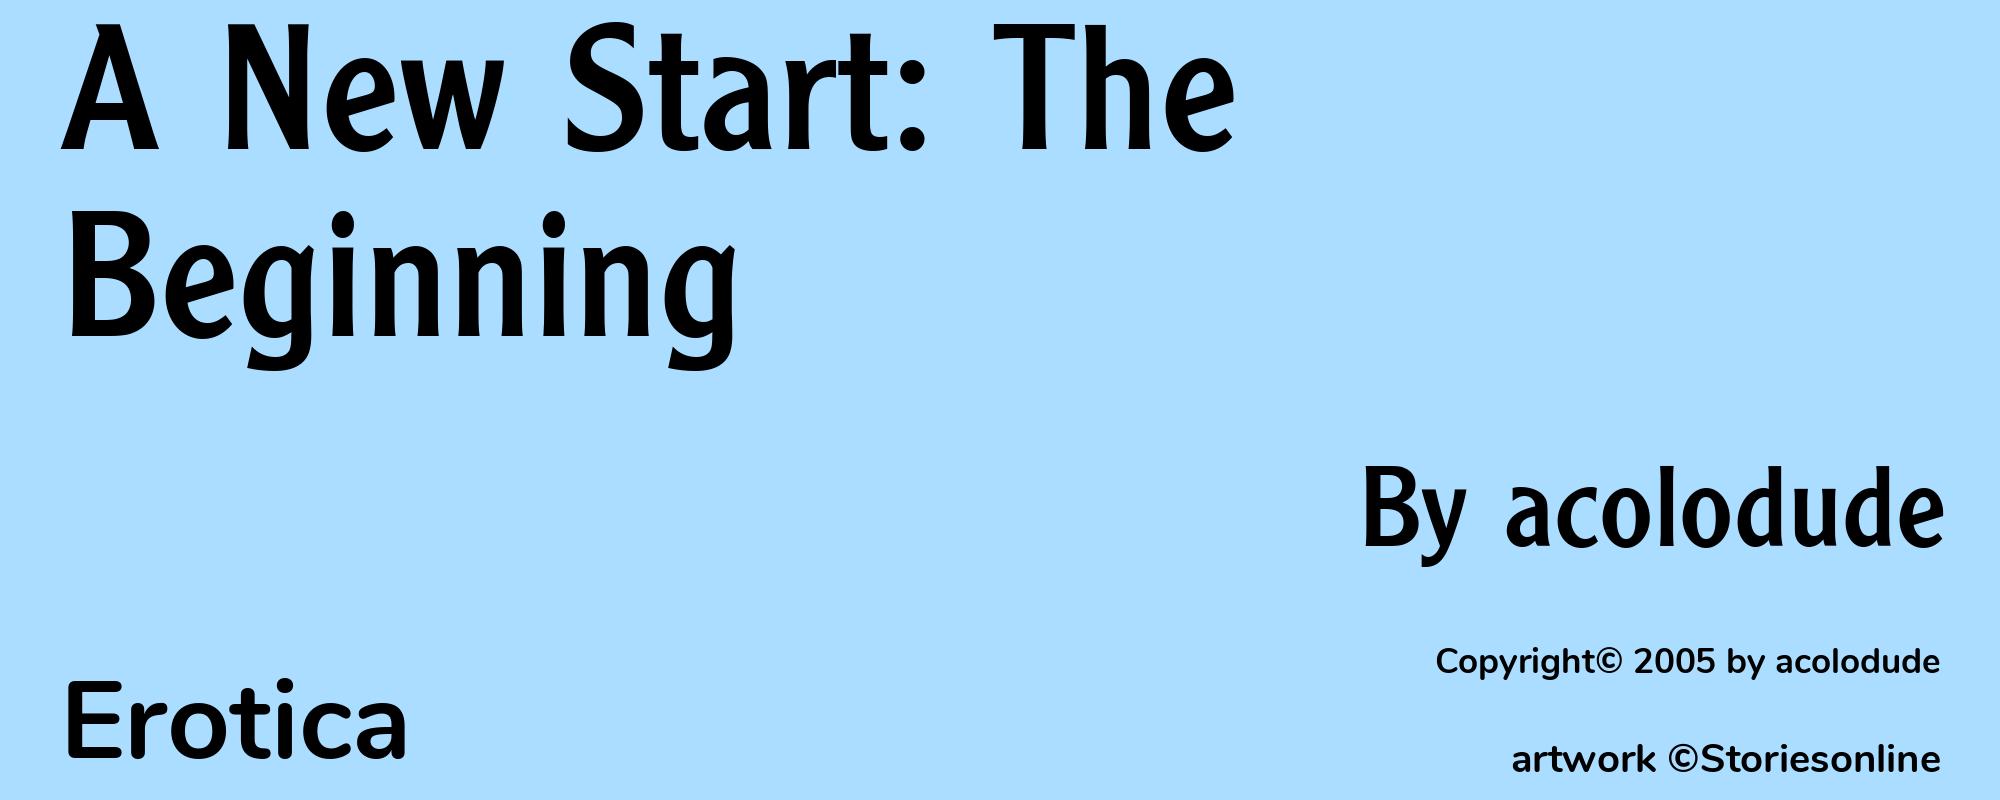 A New Start: The Beginning - Cover